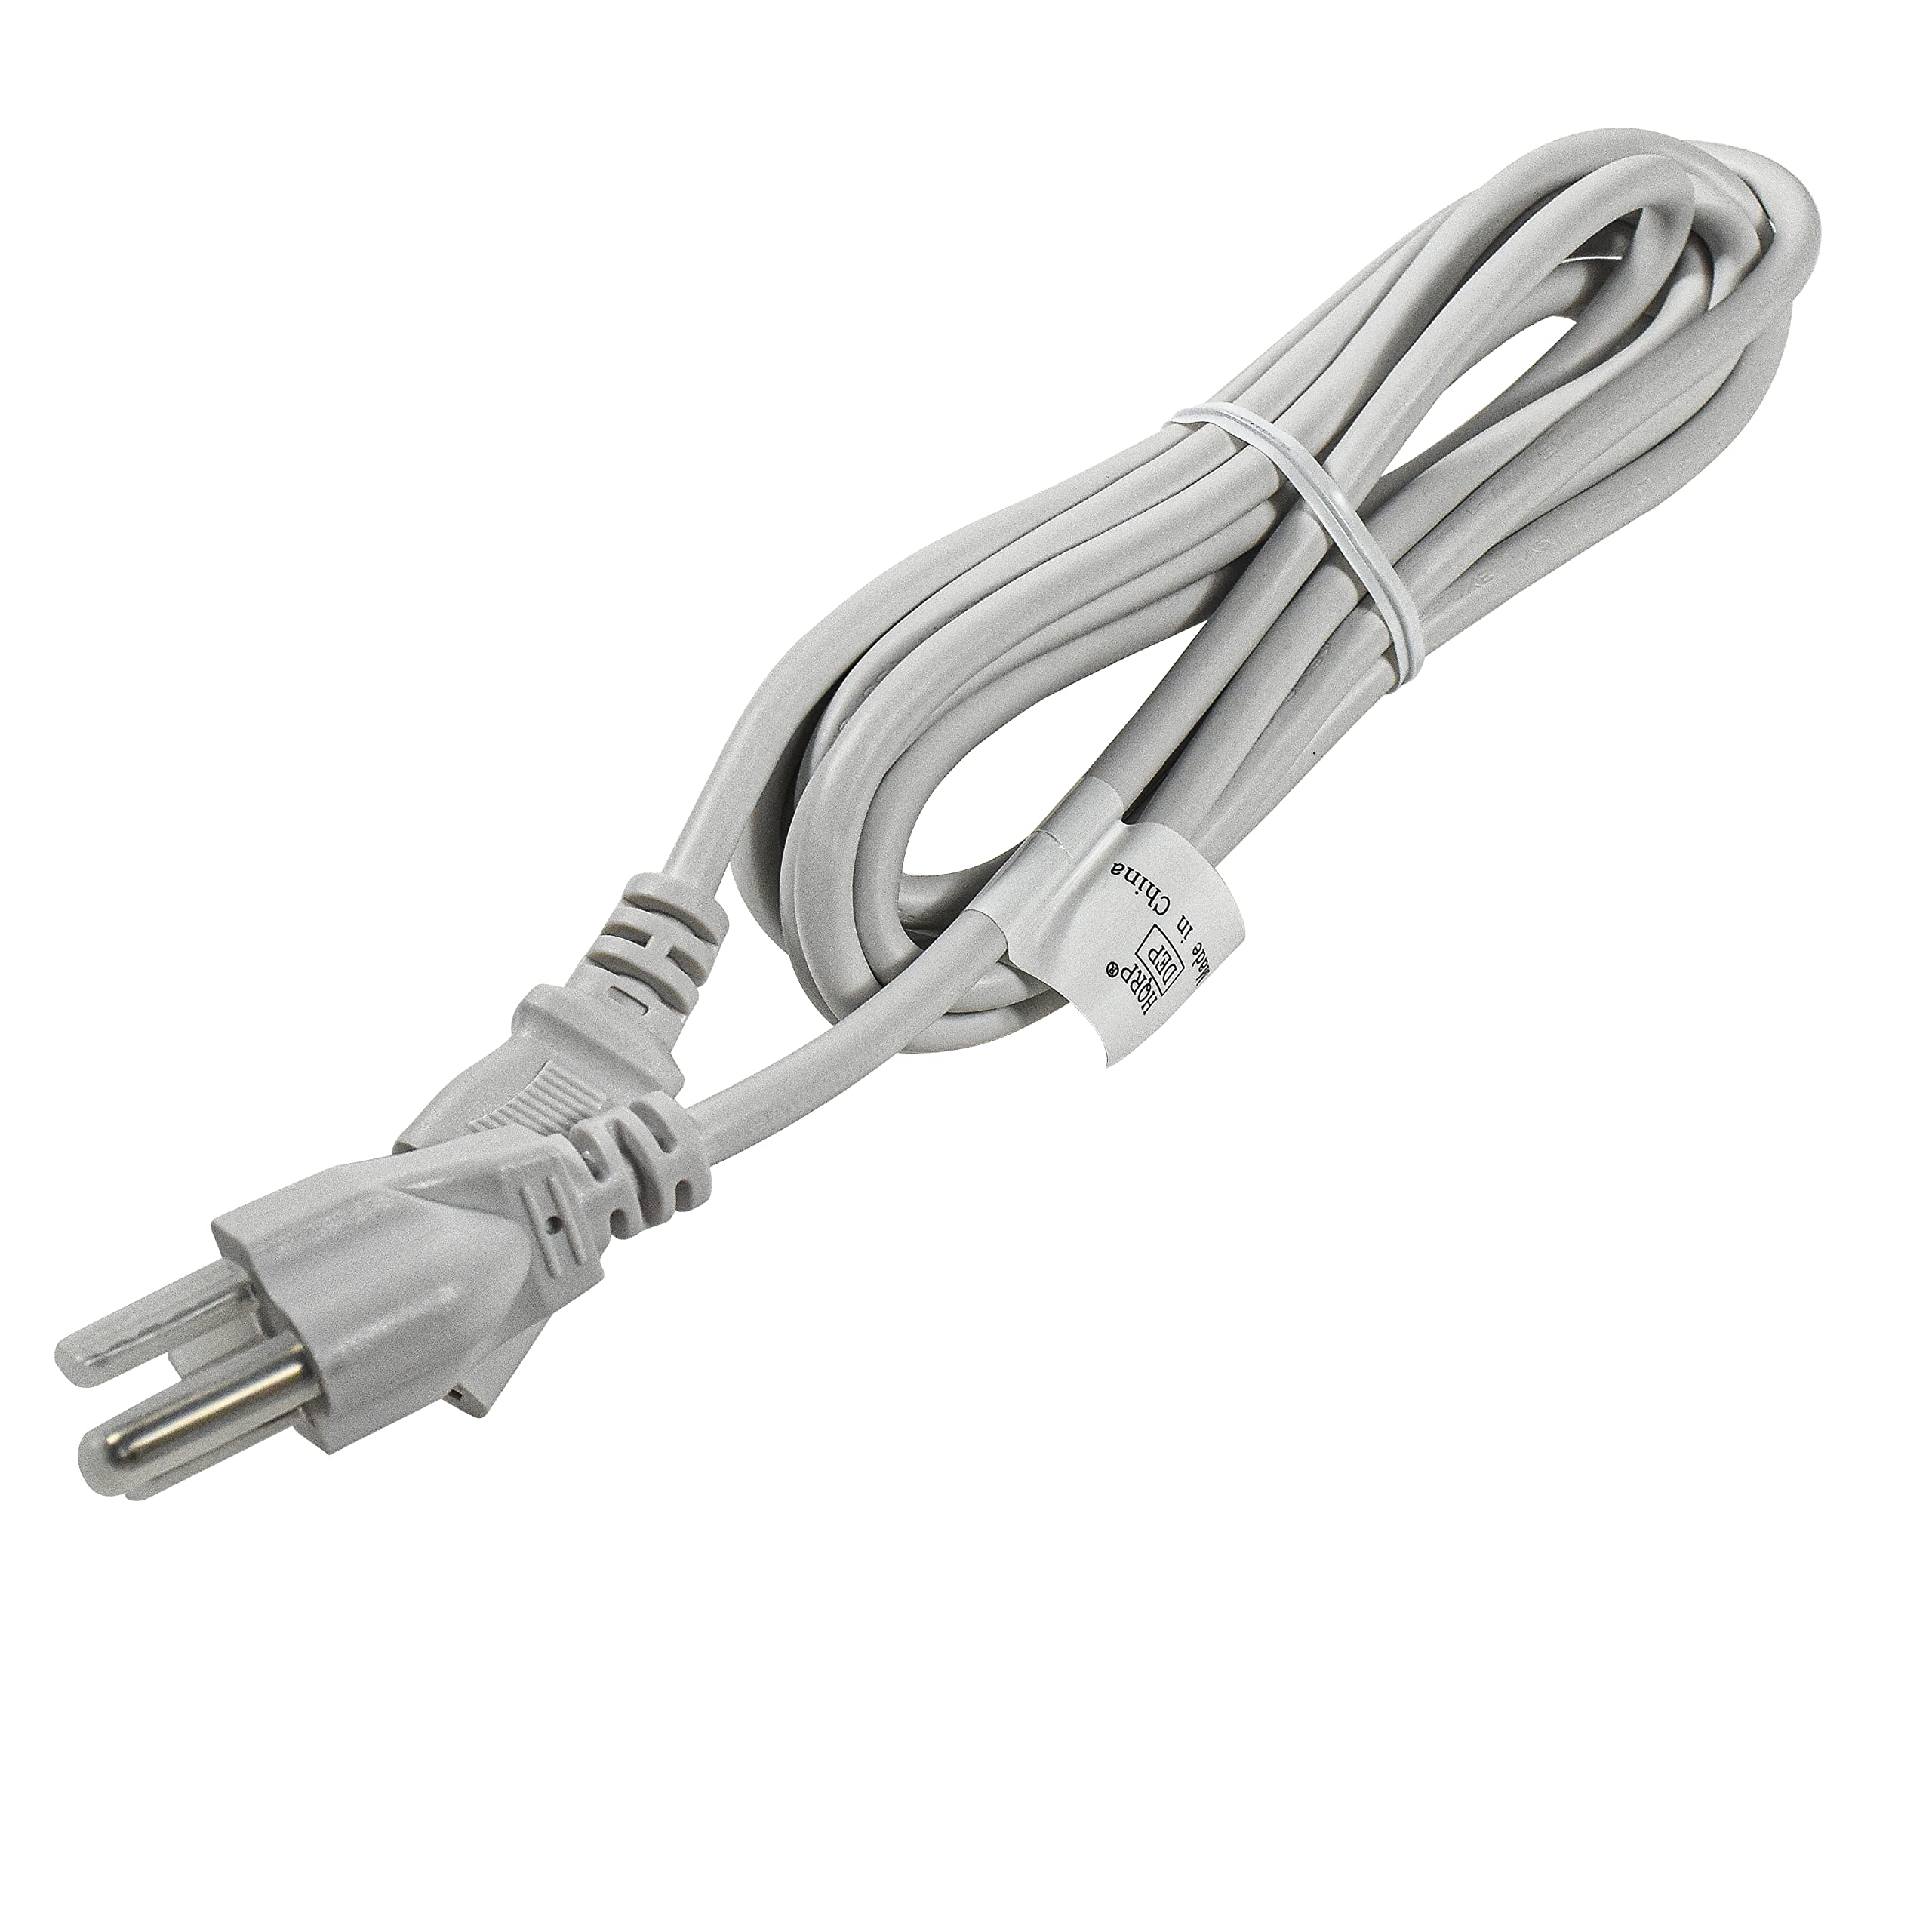 HQRP 10ft AC Power Cord fits Brother MFC-7820N MFC-7840W MFC-8220 MFC-8480DN MFC-8640D MFC-8660DN Copier Mains Cable White, UL Listed